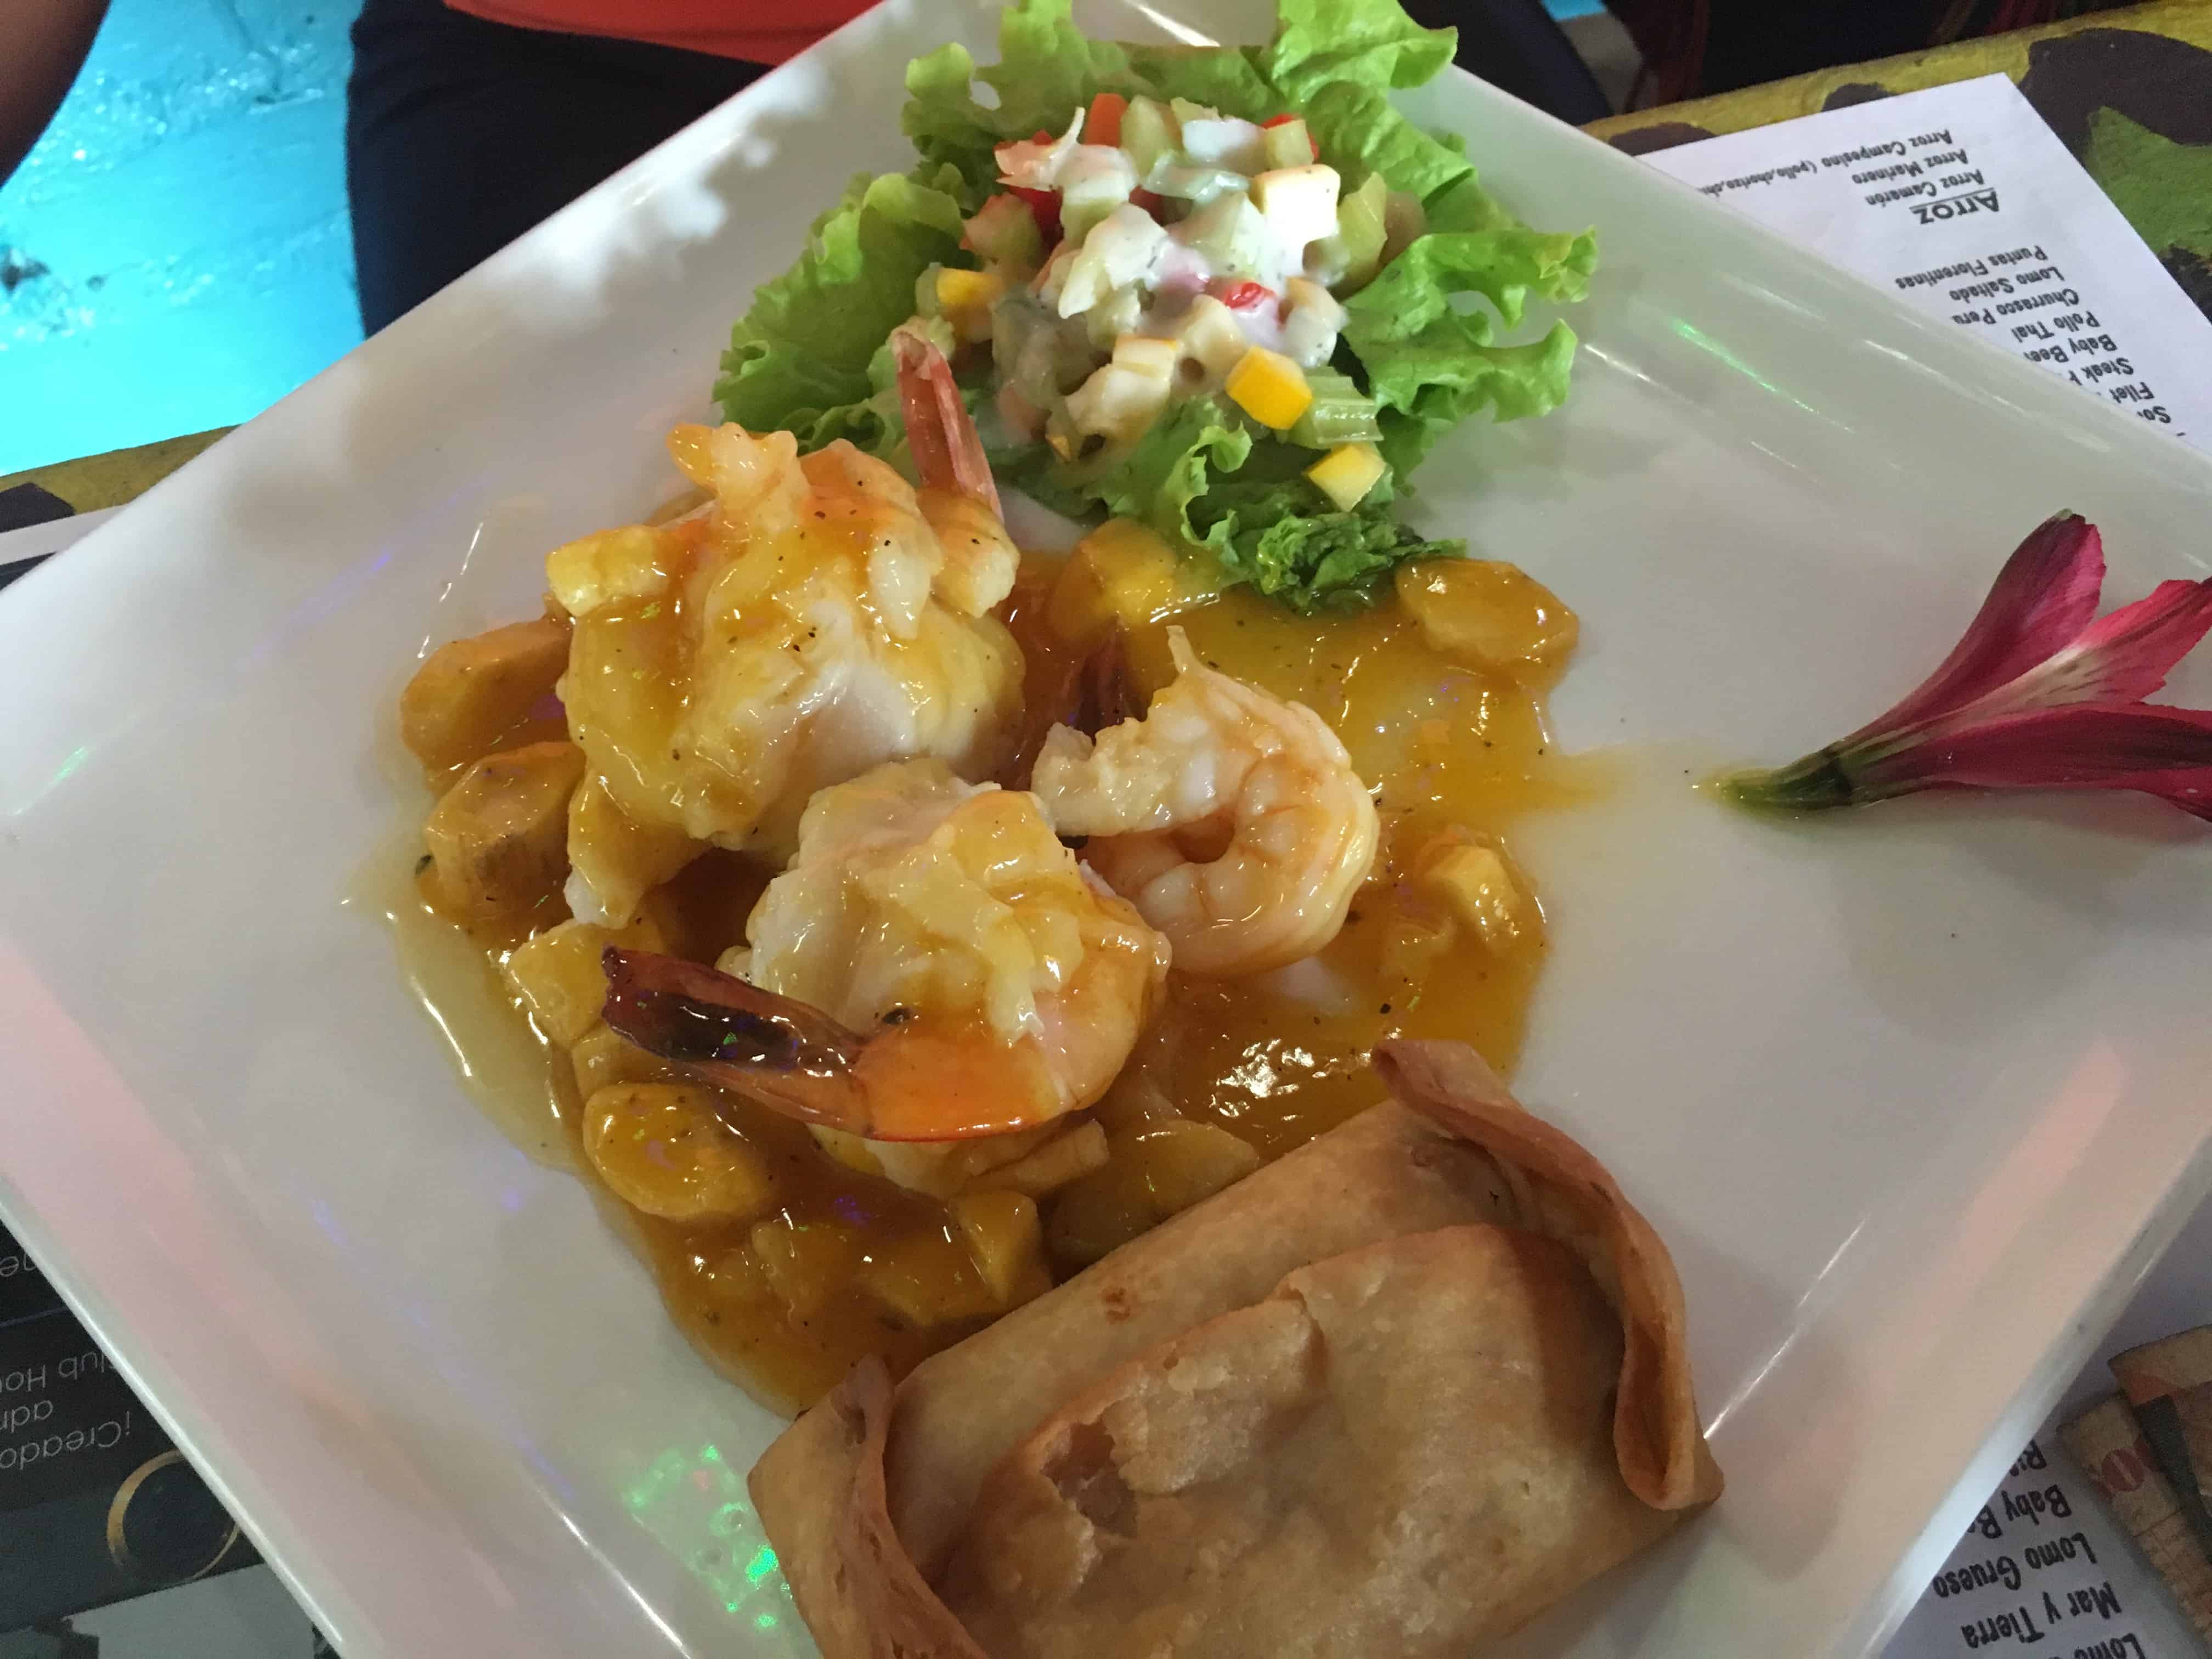 Fish topped with tropical fruits and shrimp at El Solar in Armenia, Quindío, Colombia